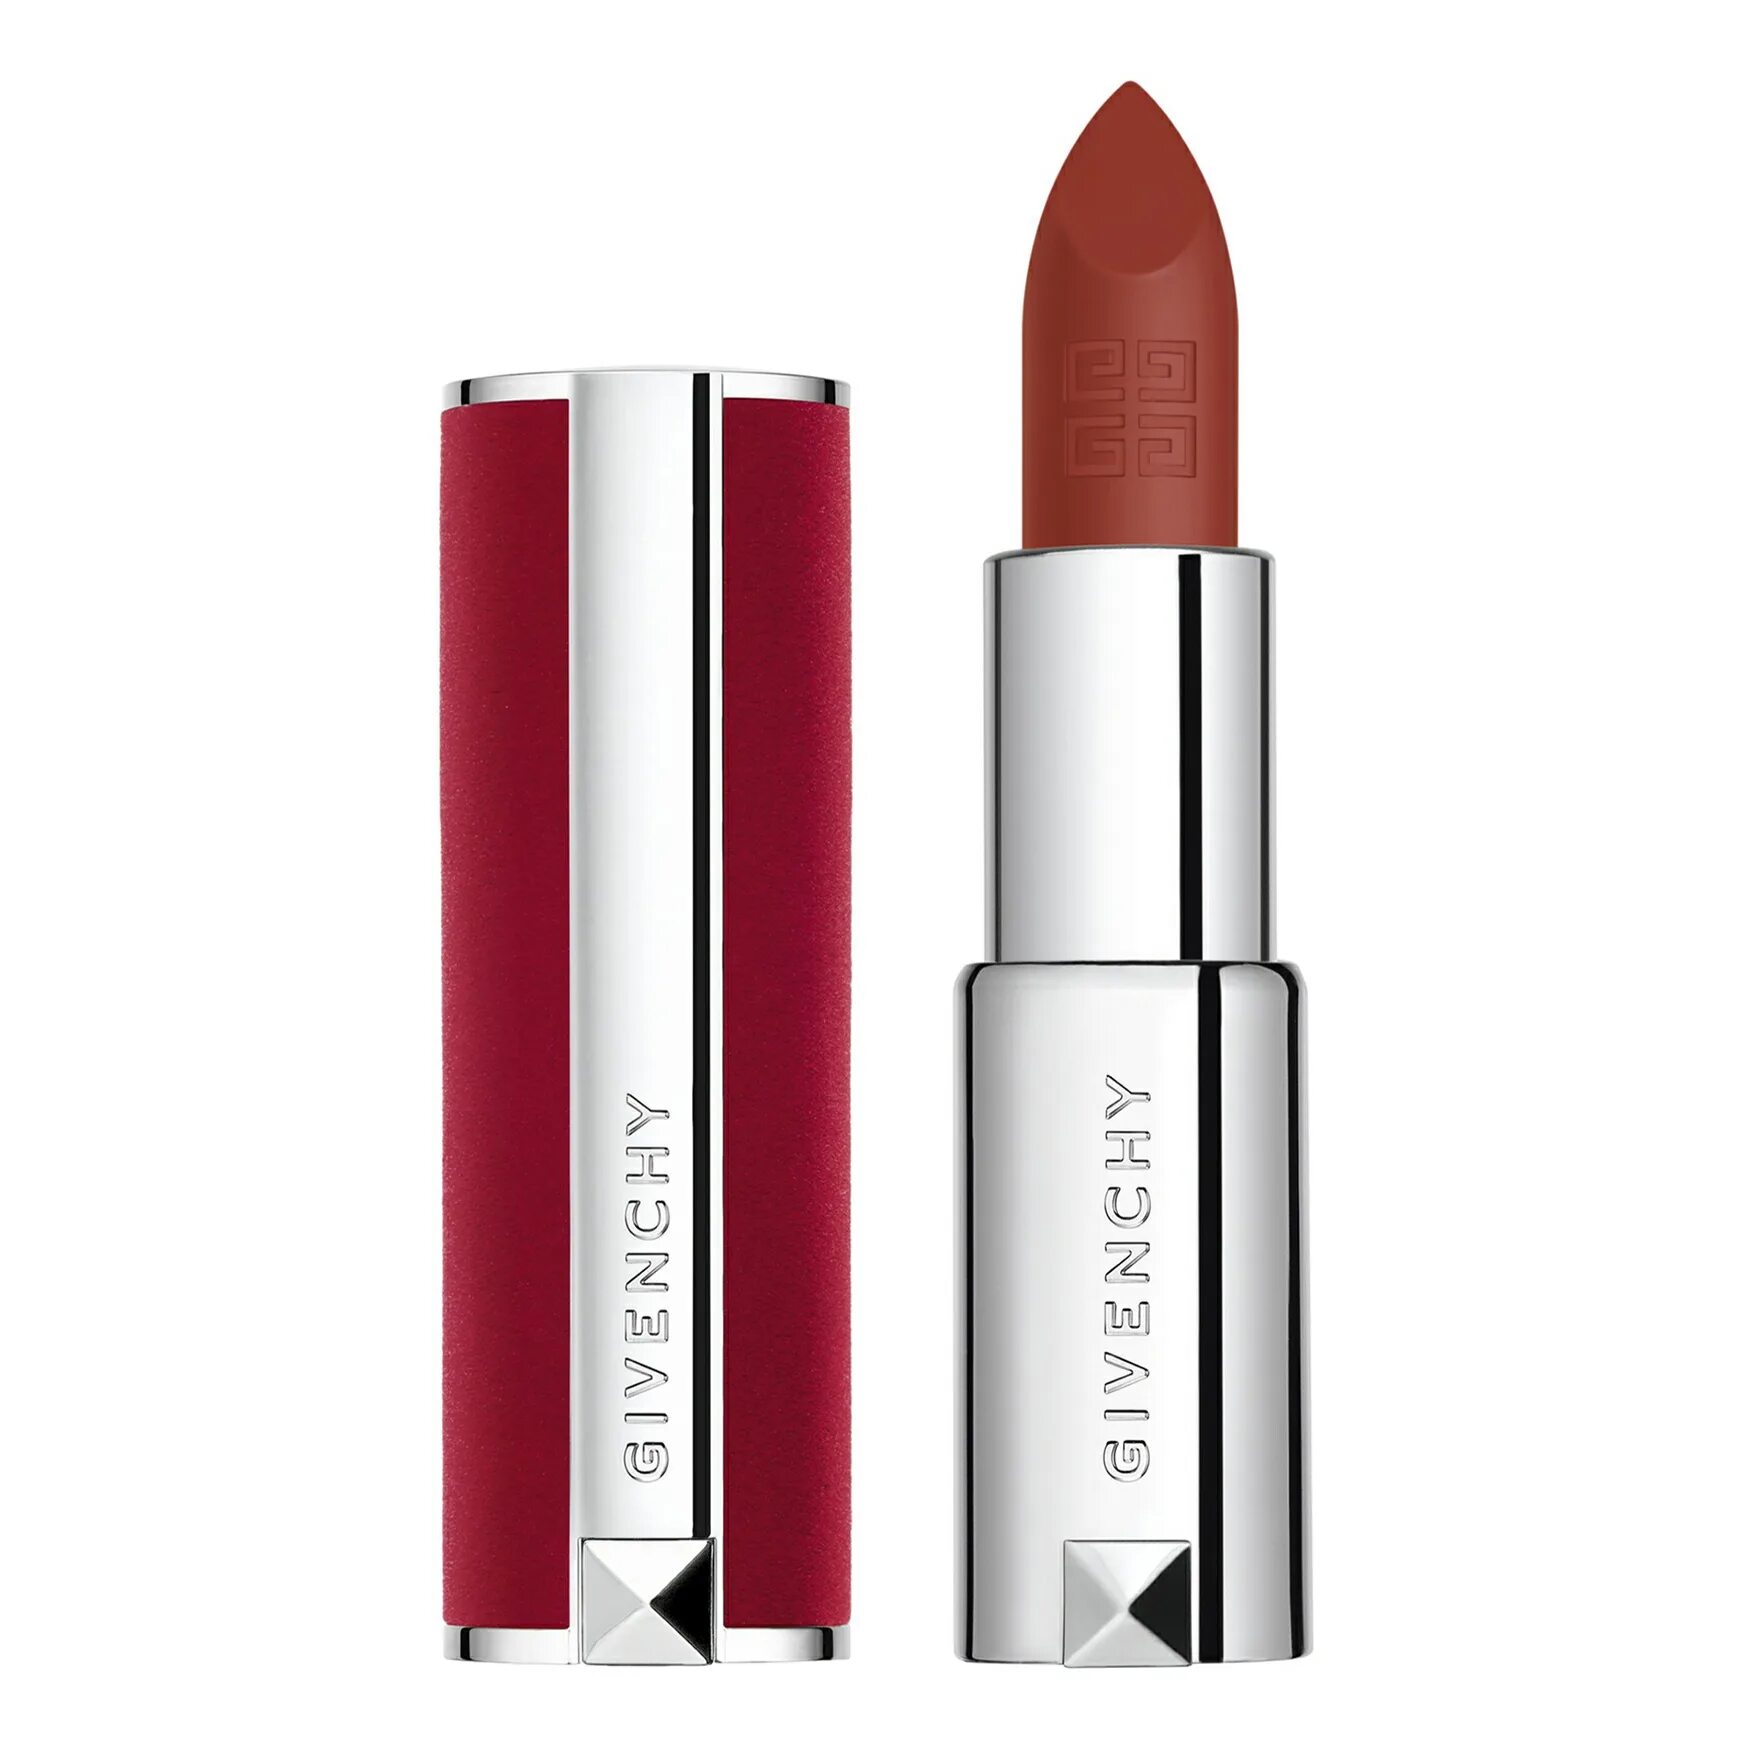 Помада Givenchy le rouge 100. Givenchy le rouge Lipstick 100. Givenchy le rouge Sheer Velvet. Givenchy le rouge 37. Губная помада givenchy